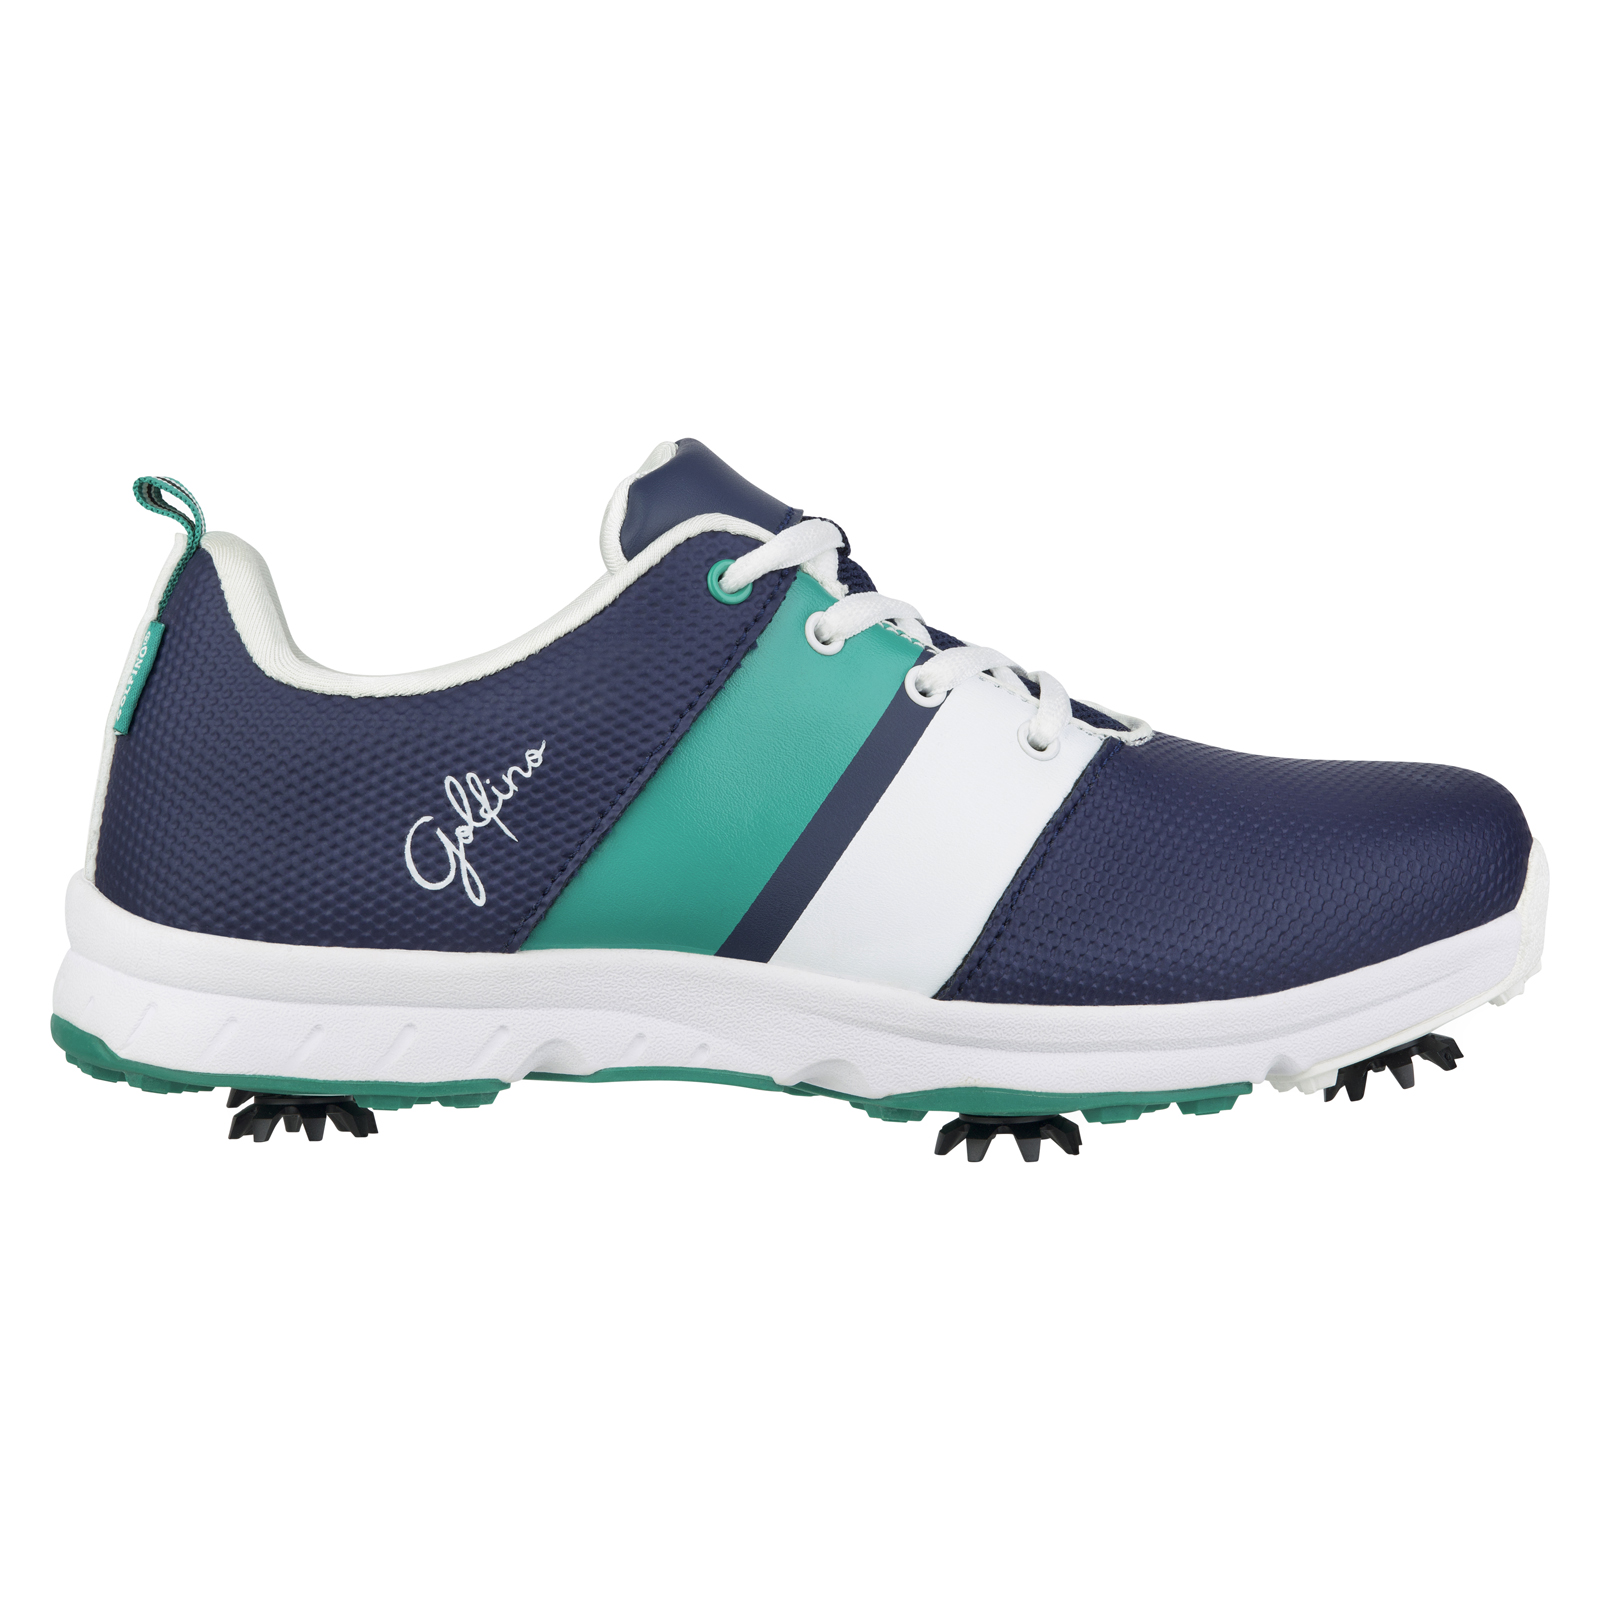 Ladies' waterproof golf shoes with spikes